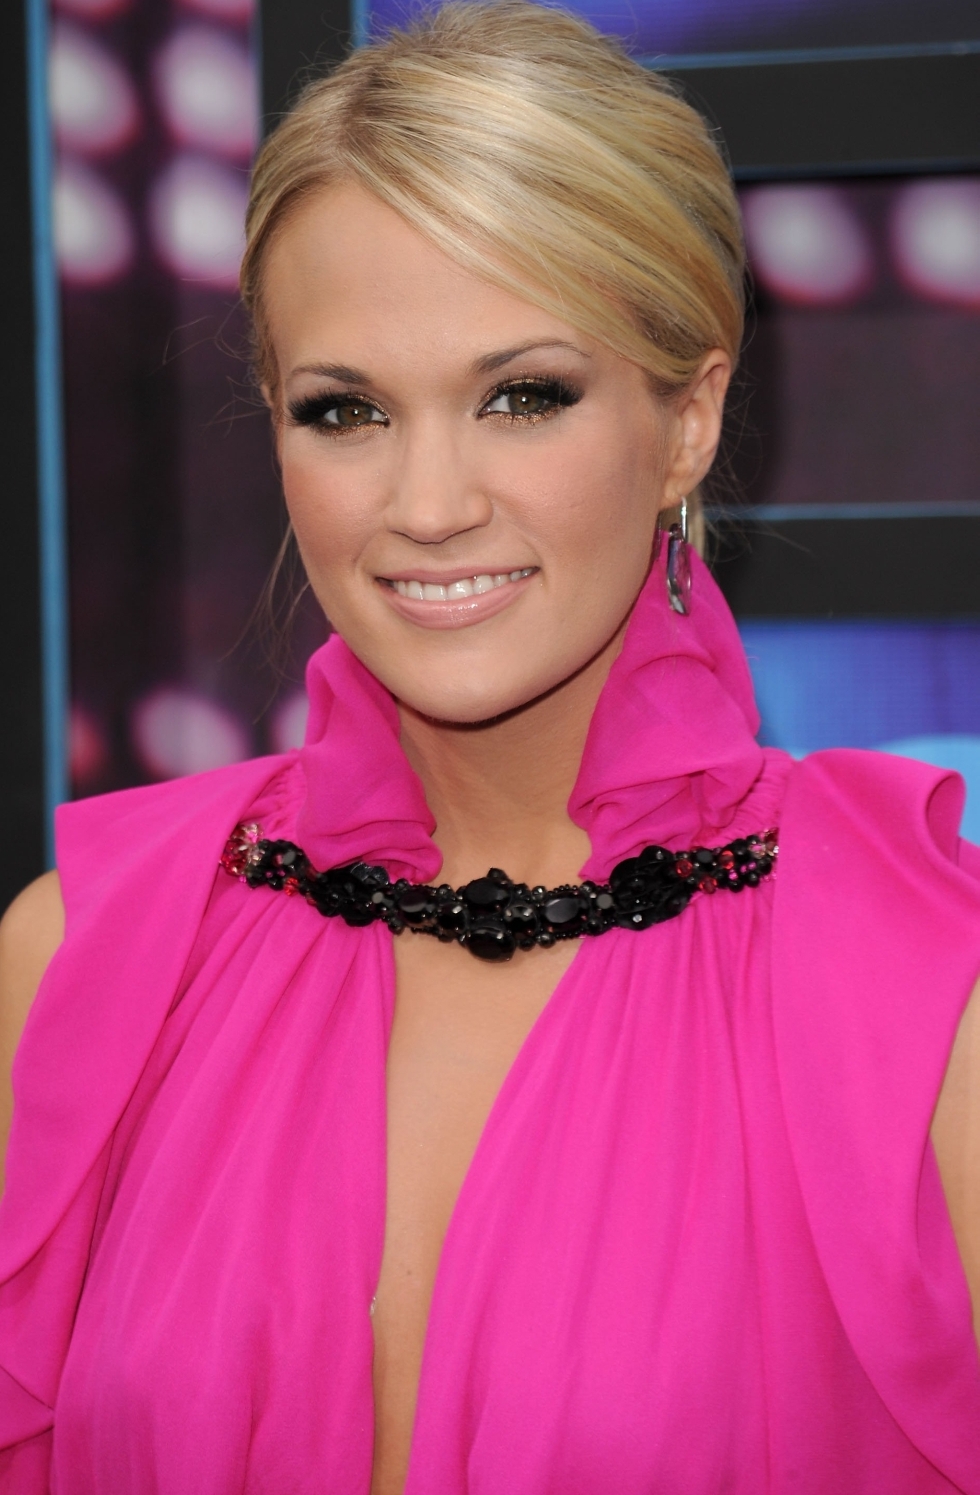 Carrie Underwood - CMT Music Awards